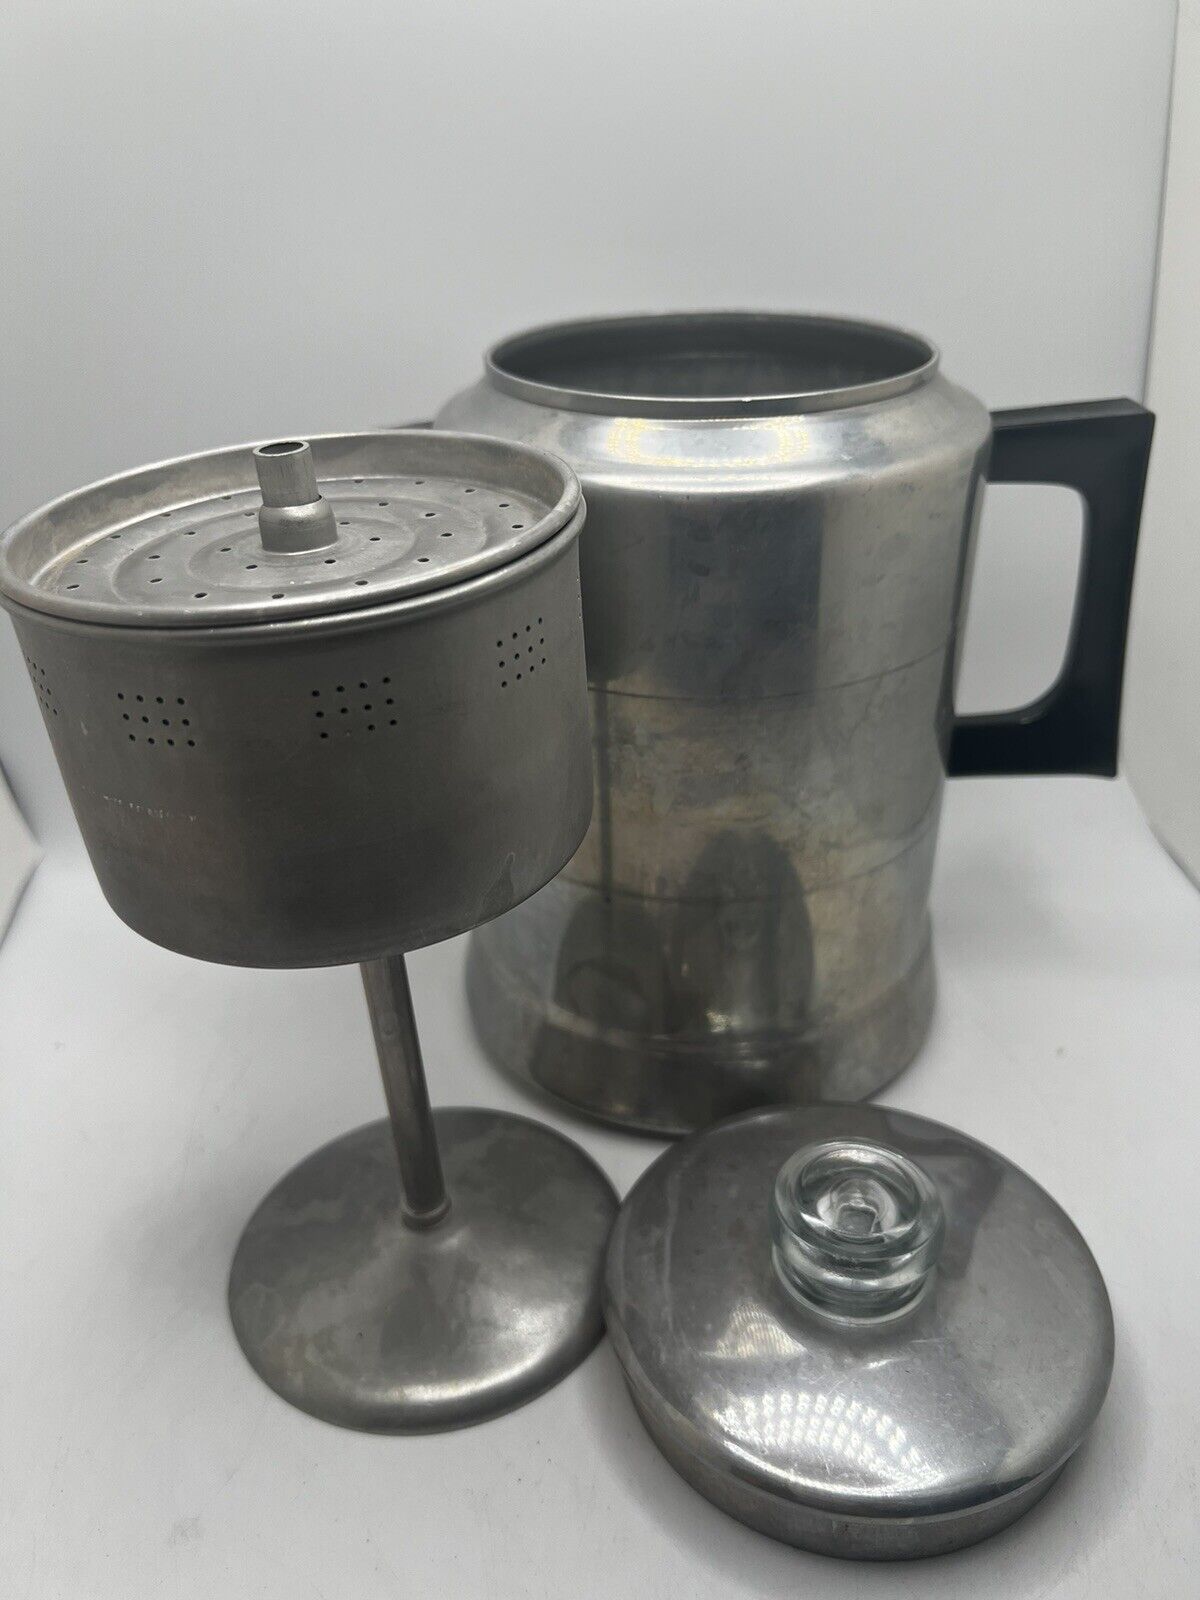 Vintage Comet Aluminum 9 Cup Coffee Pot Percolator for Camping or Stove Top